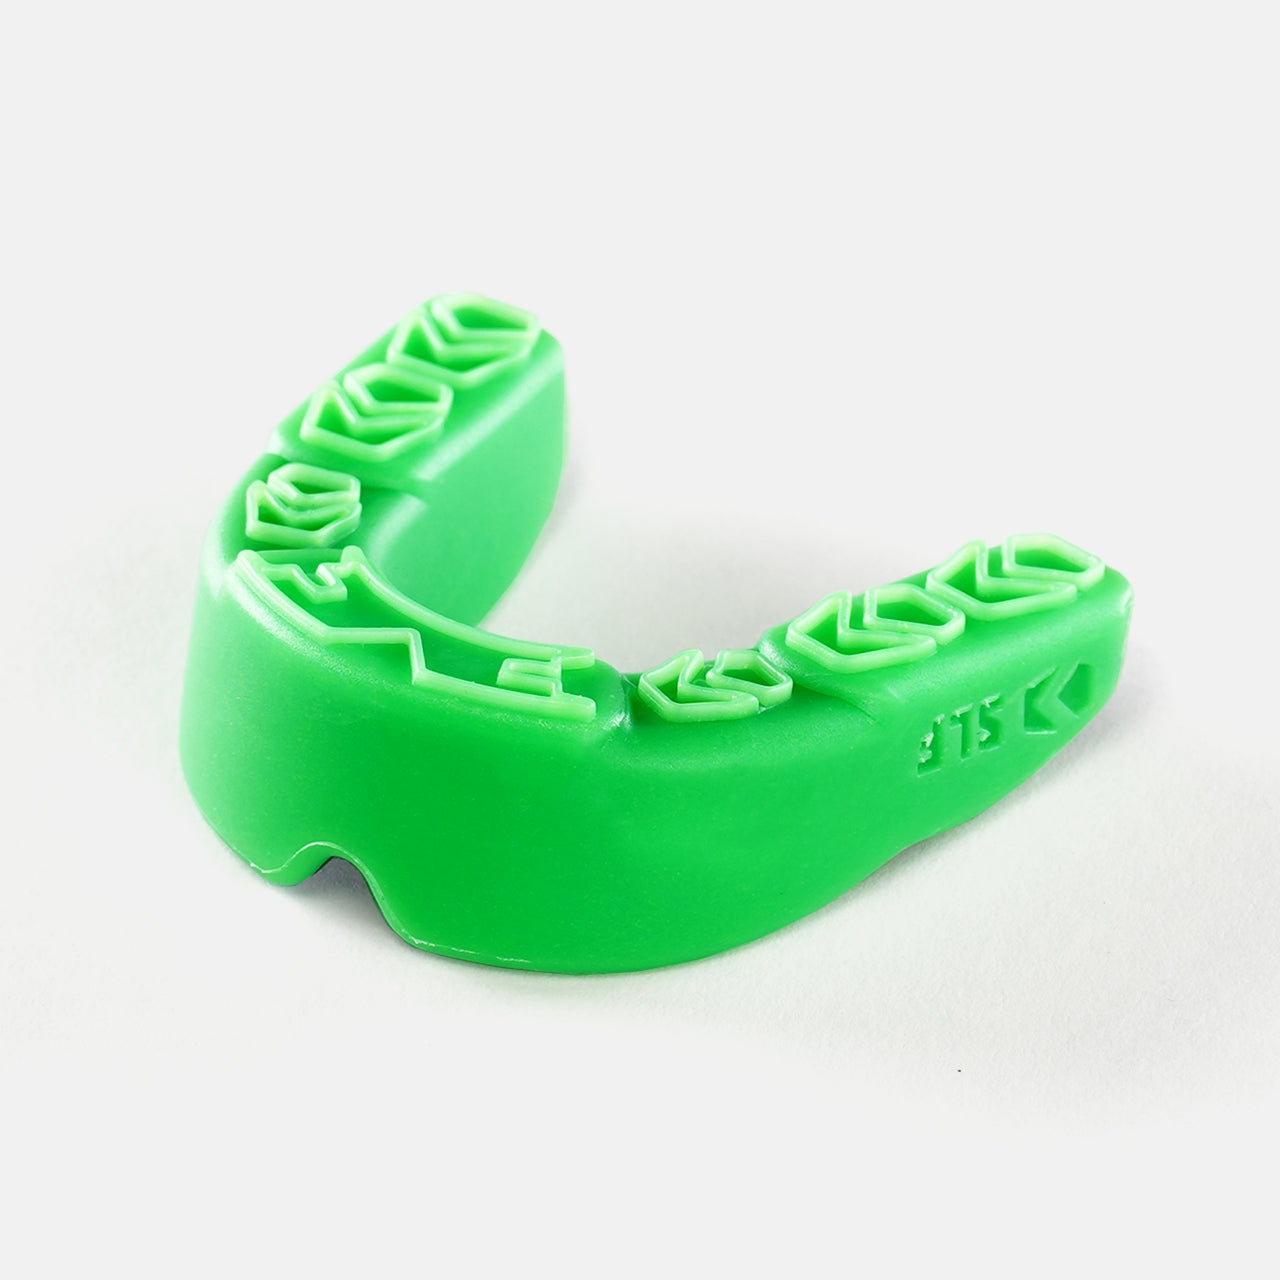 Green and Navy Blue All Sports Mouthguard